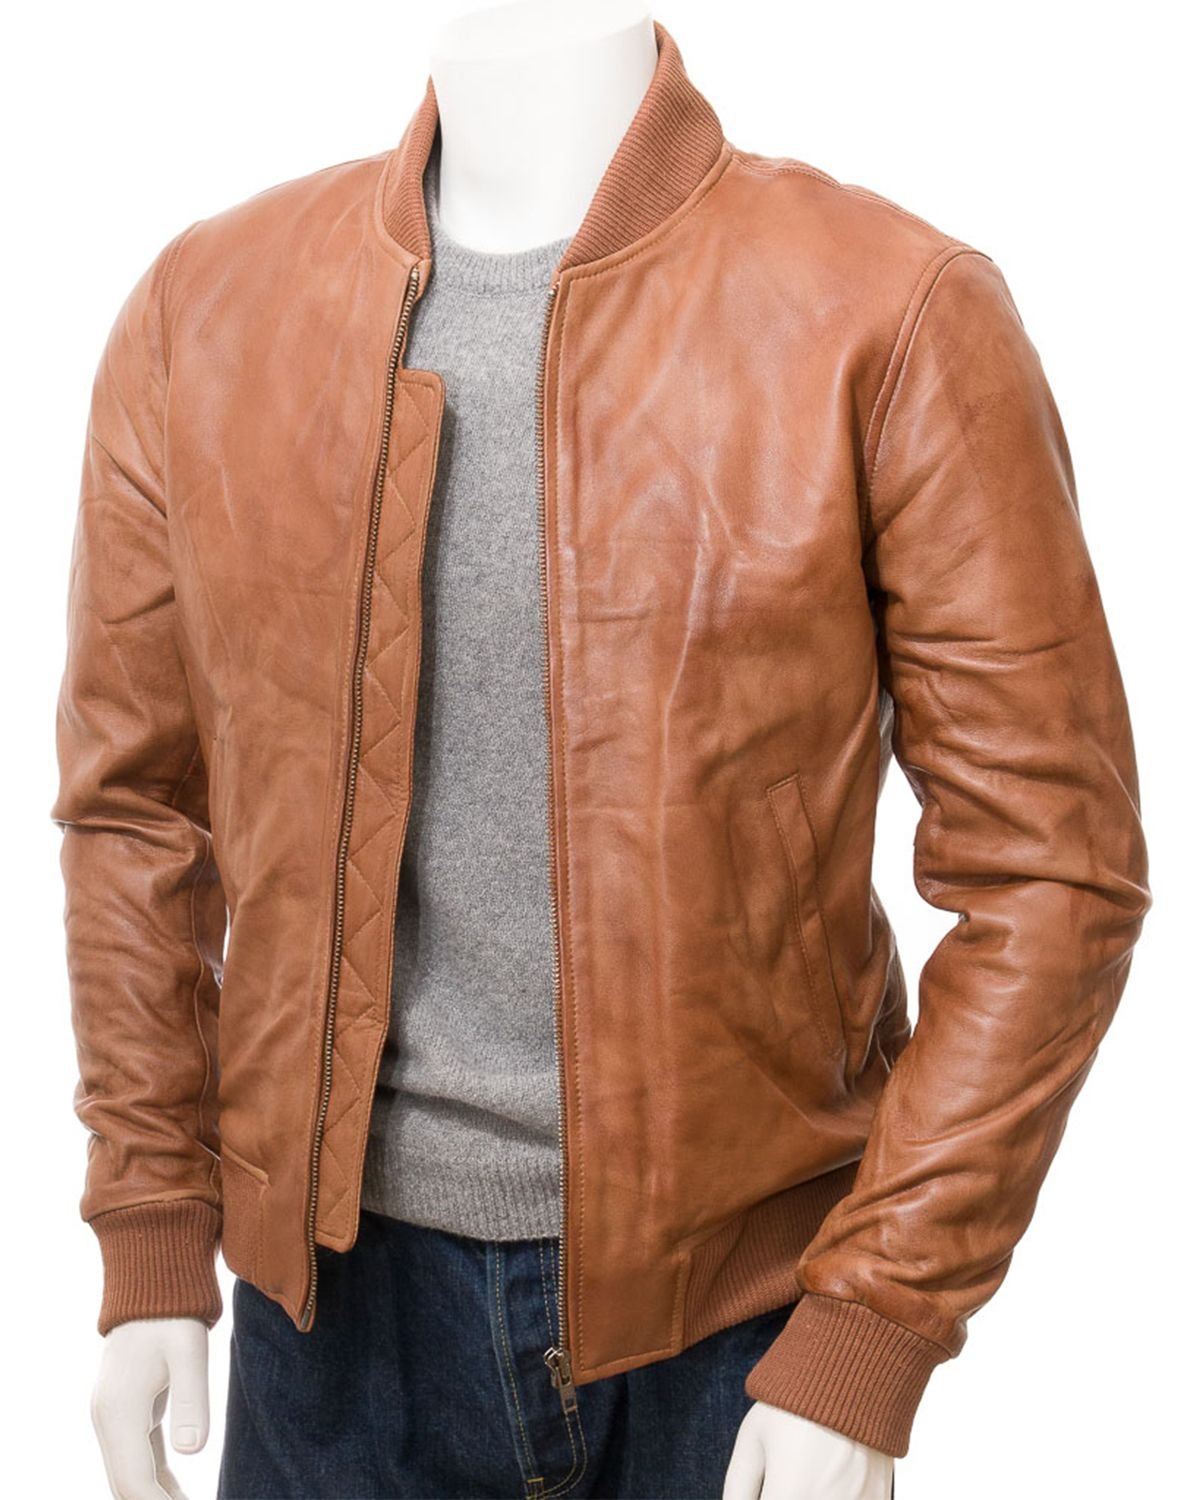 Ribbed Cuffs Tan Brown Bomber Leather Jacket for Men